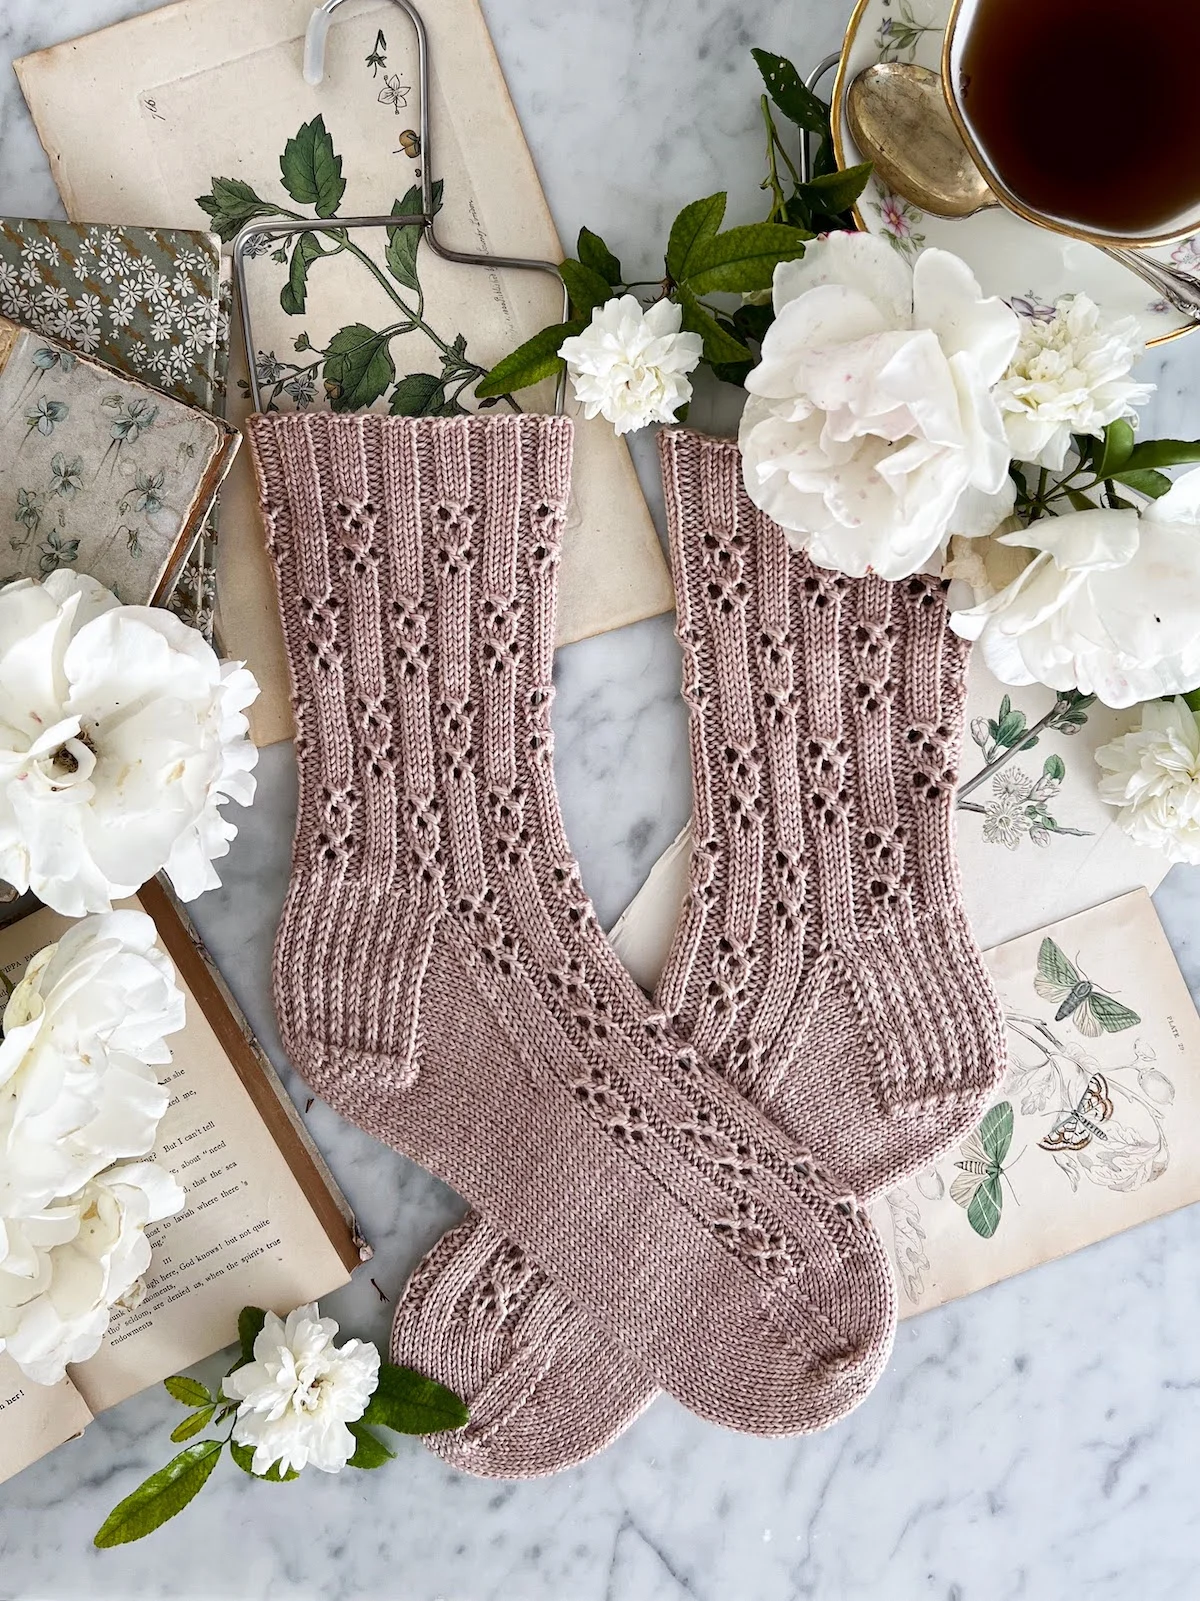 A top-down photo of a pair of pink, handknit socks laid flat on a white marble countertop. The socks are crossed at the foot and feature an all-over eyelet pattern. They're surrounded by antique paper ephemera, white roses, old books, and a teacup full of tea.